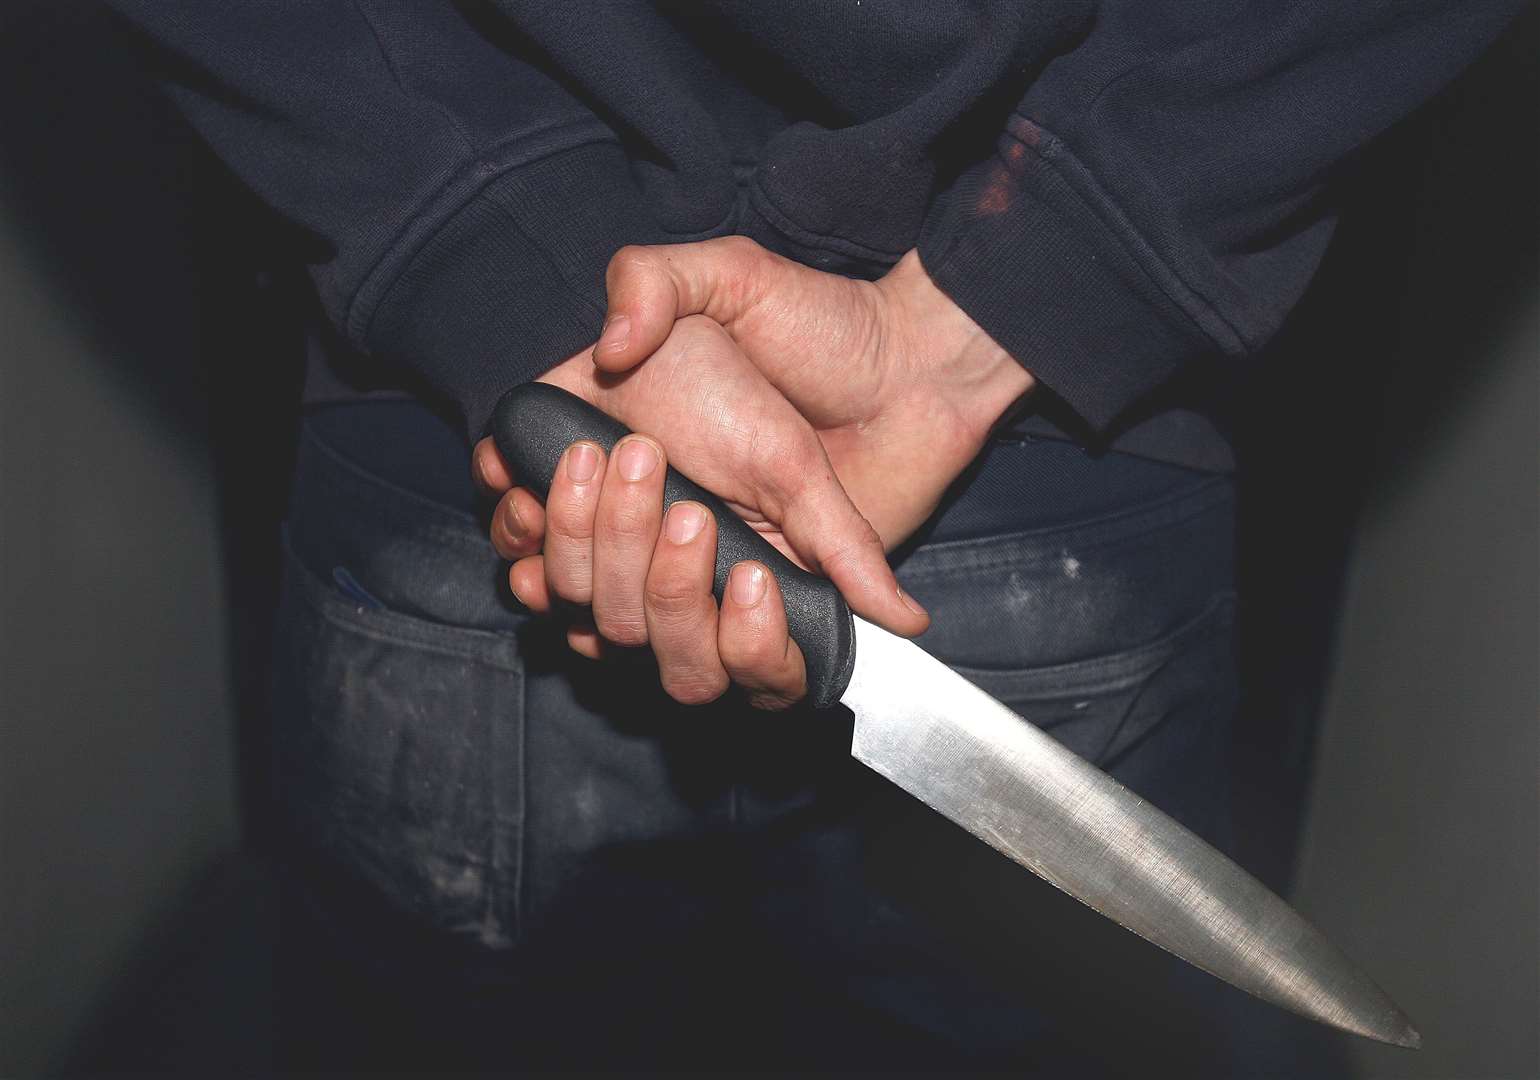 The victim had to go to hospital following the knife attack. Stock image